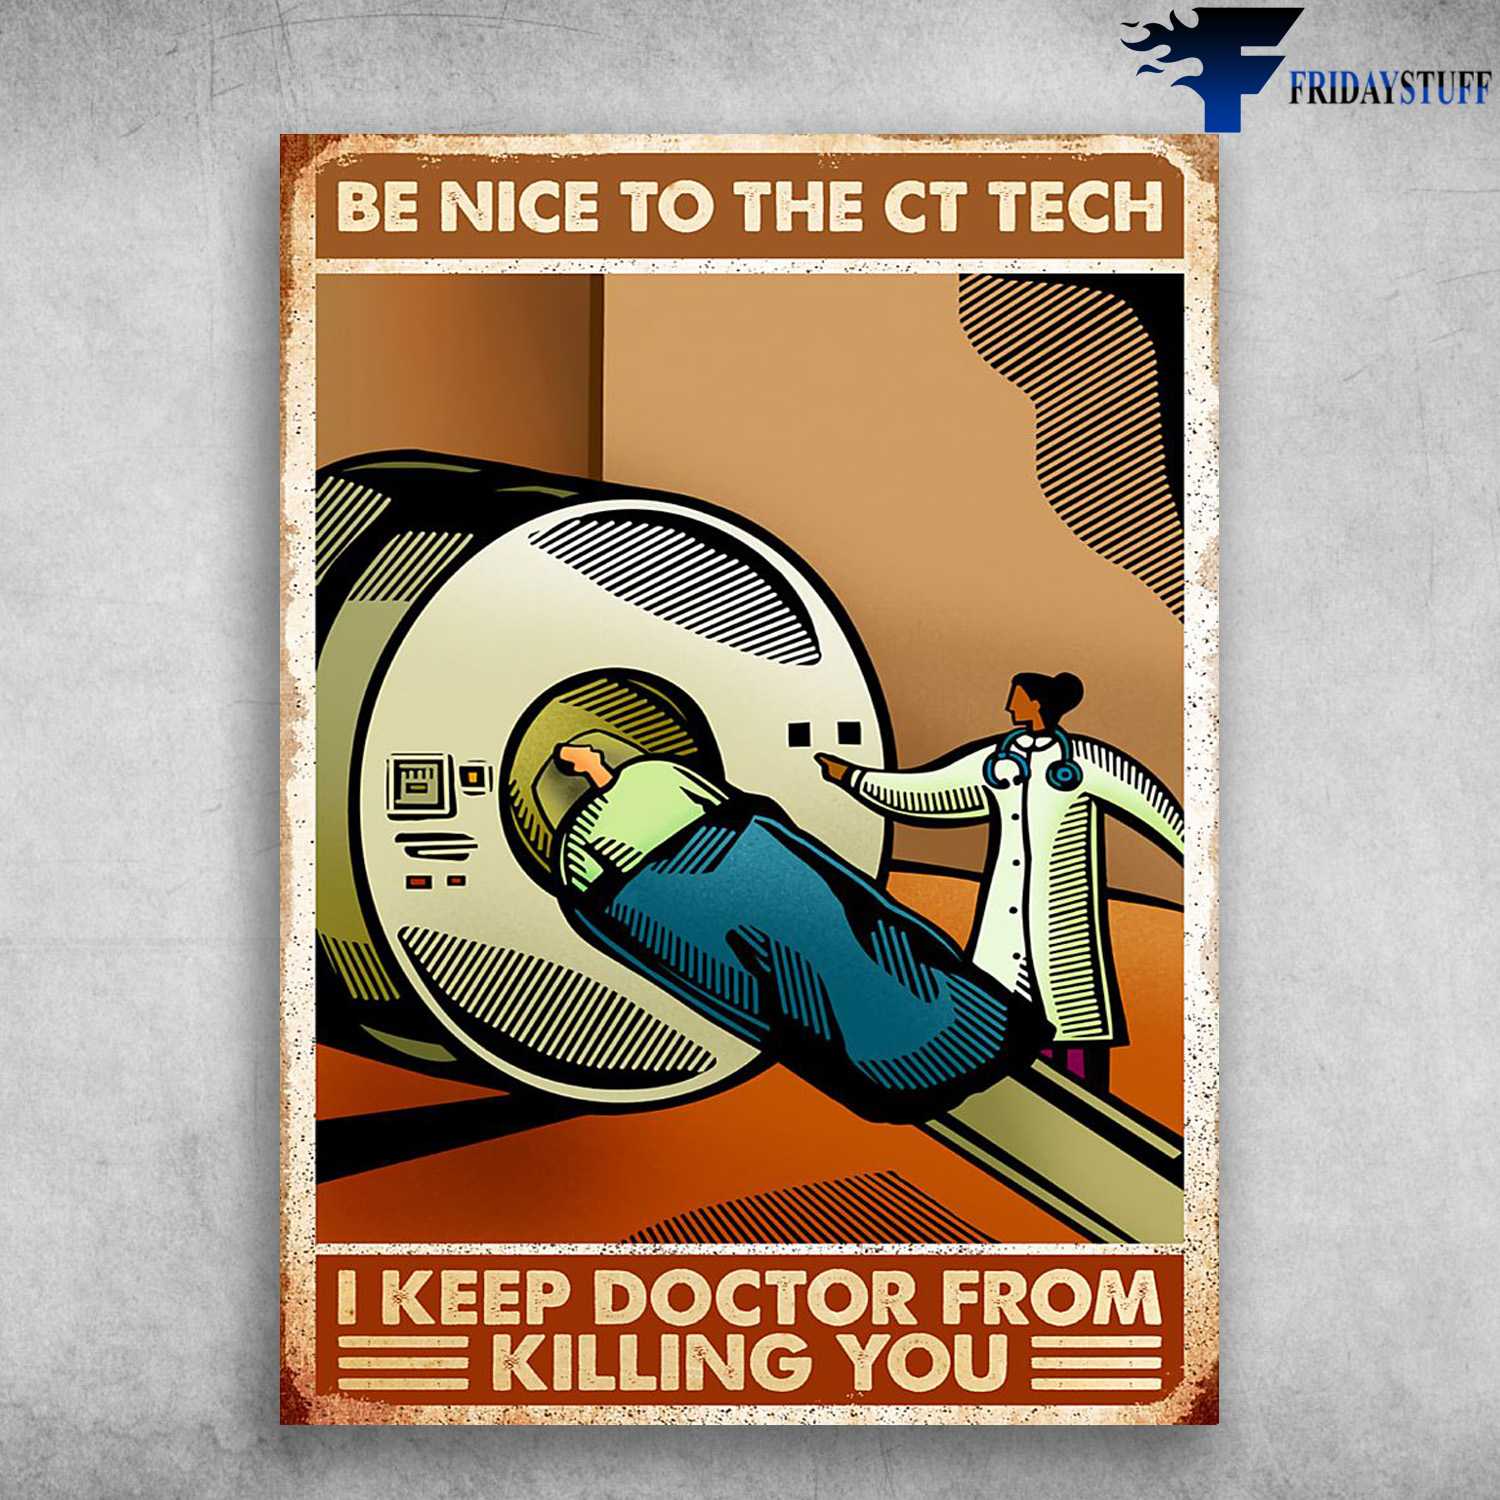 CT Scanner, X-Ray Room -Be Nice To The CT Tech, I Keep Doctor From Killing You